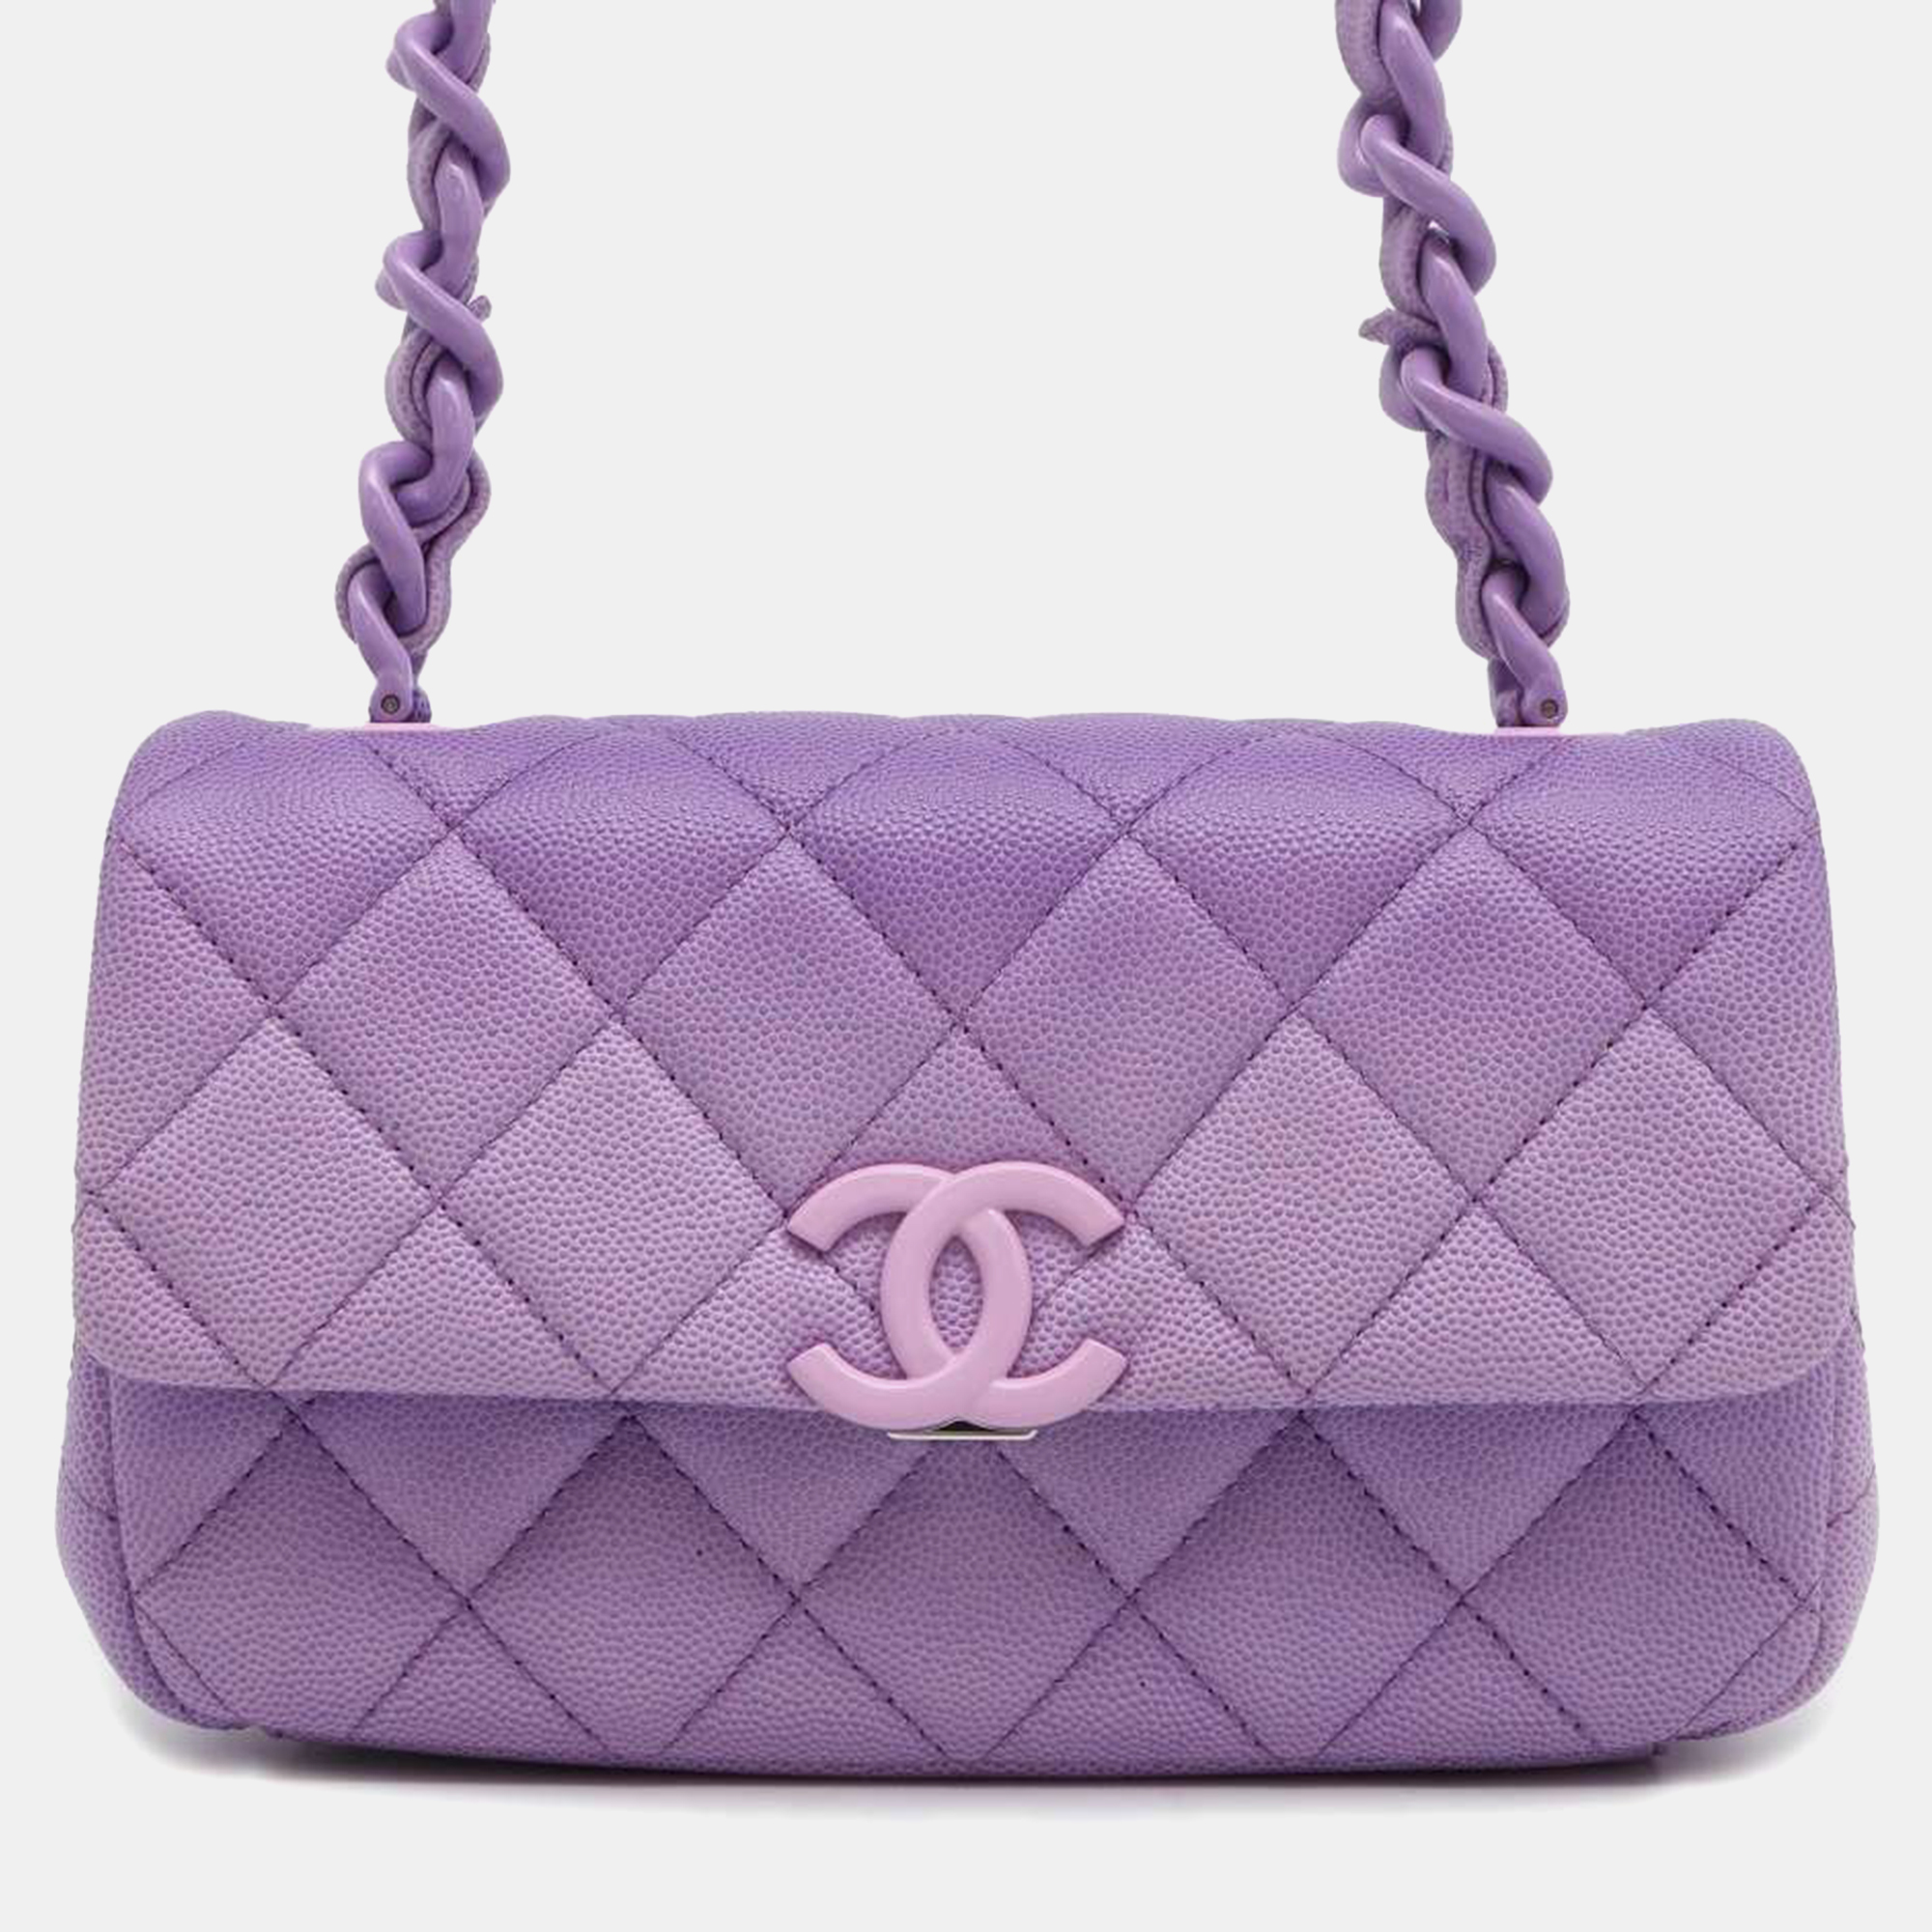 Pre-owned Chanel Purple Leather Rectangular Mini Flap Bag